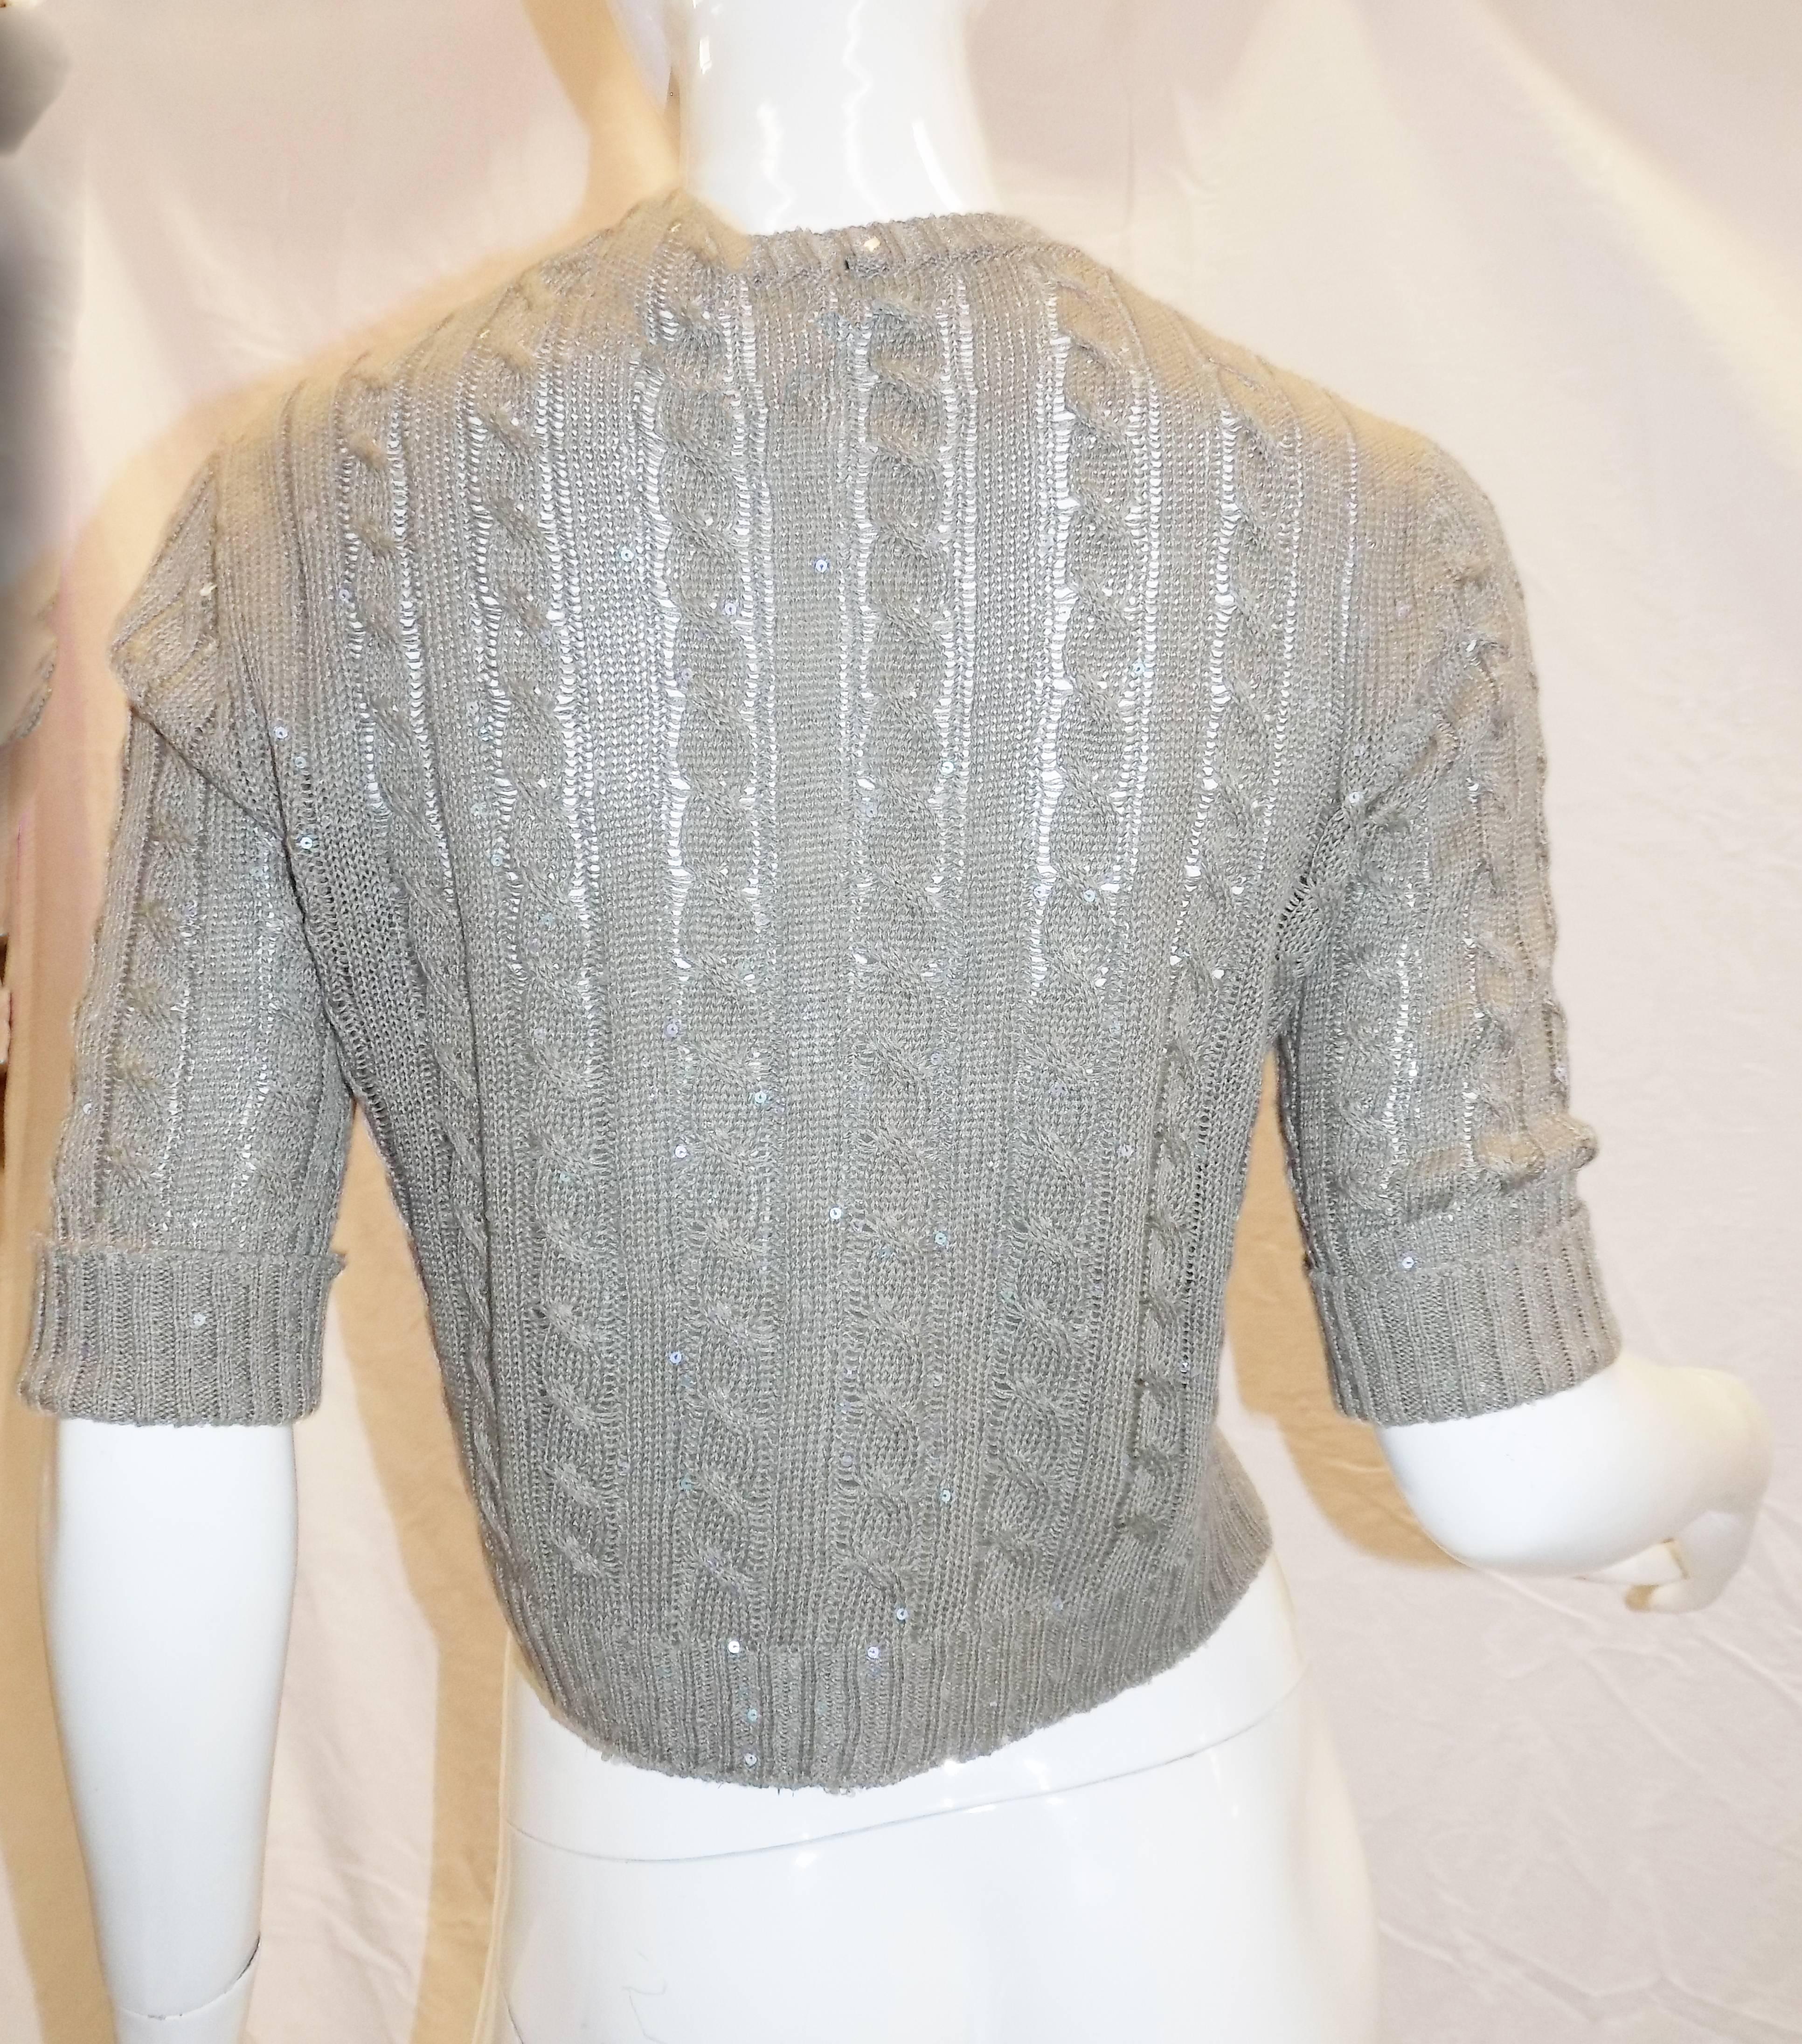 Brunello Cucinelli cable Knit Sequined Sweater cardigan crop top w zipper front 1